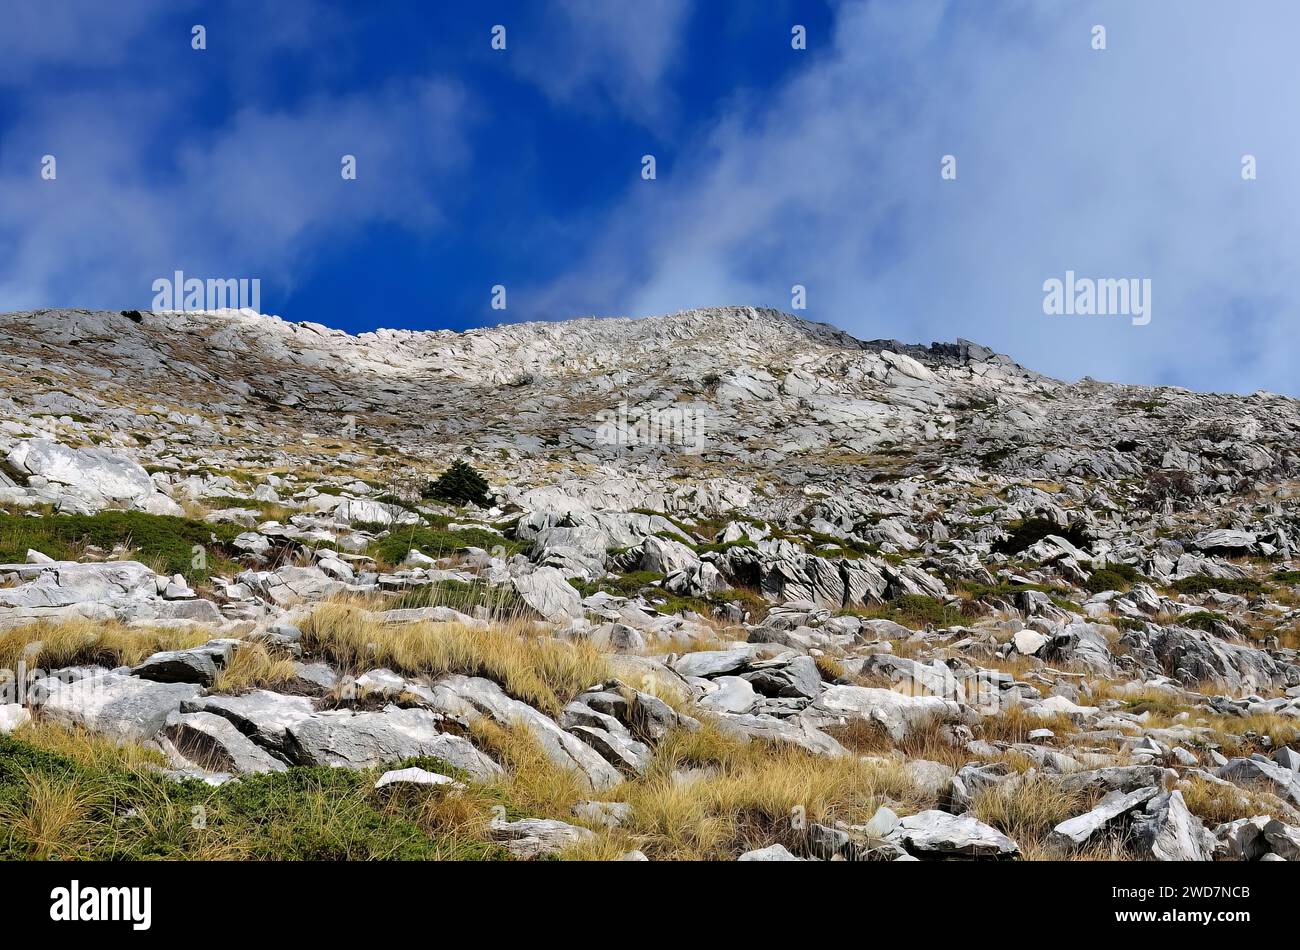 Rocky hill with scattered rocks against a backdrop of clear blue skies Stock Photo